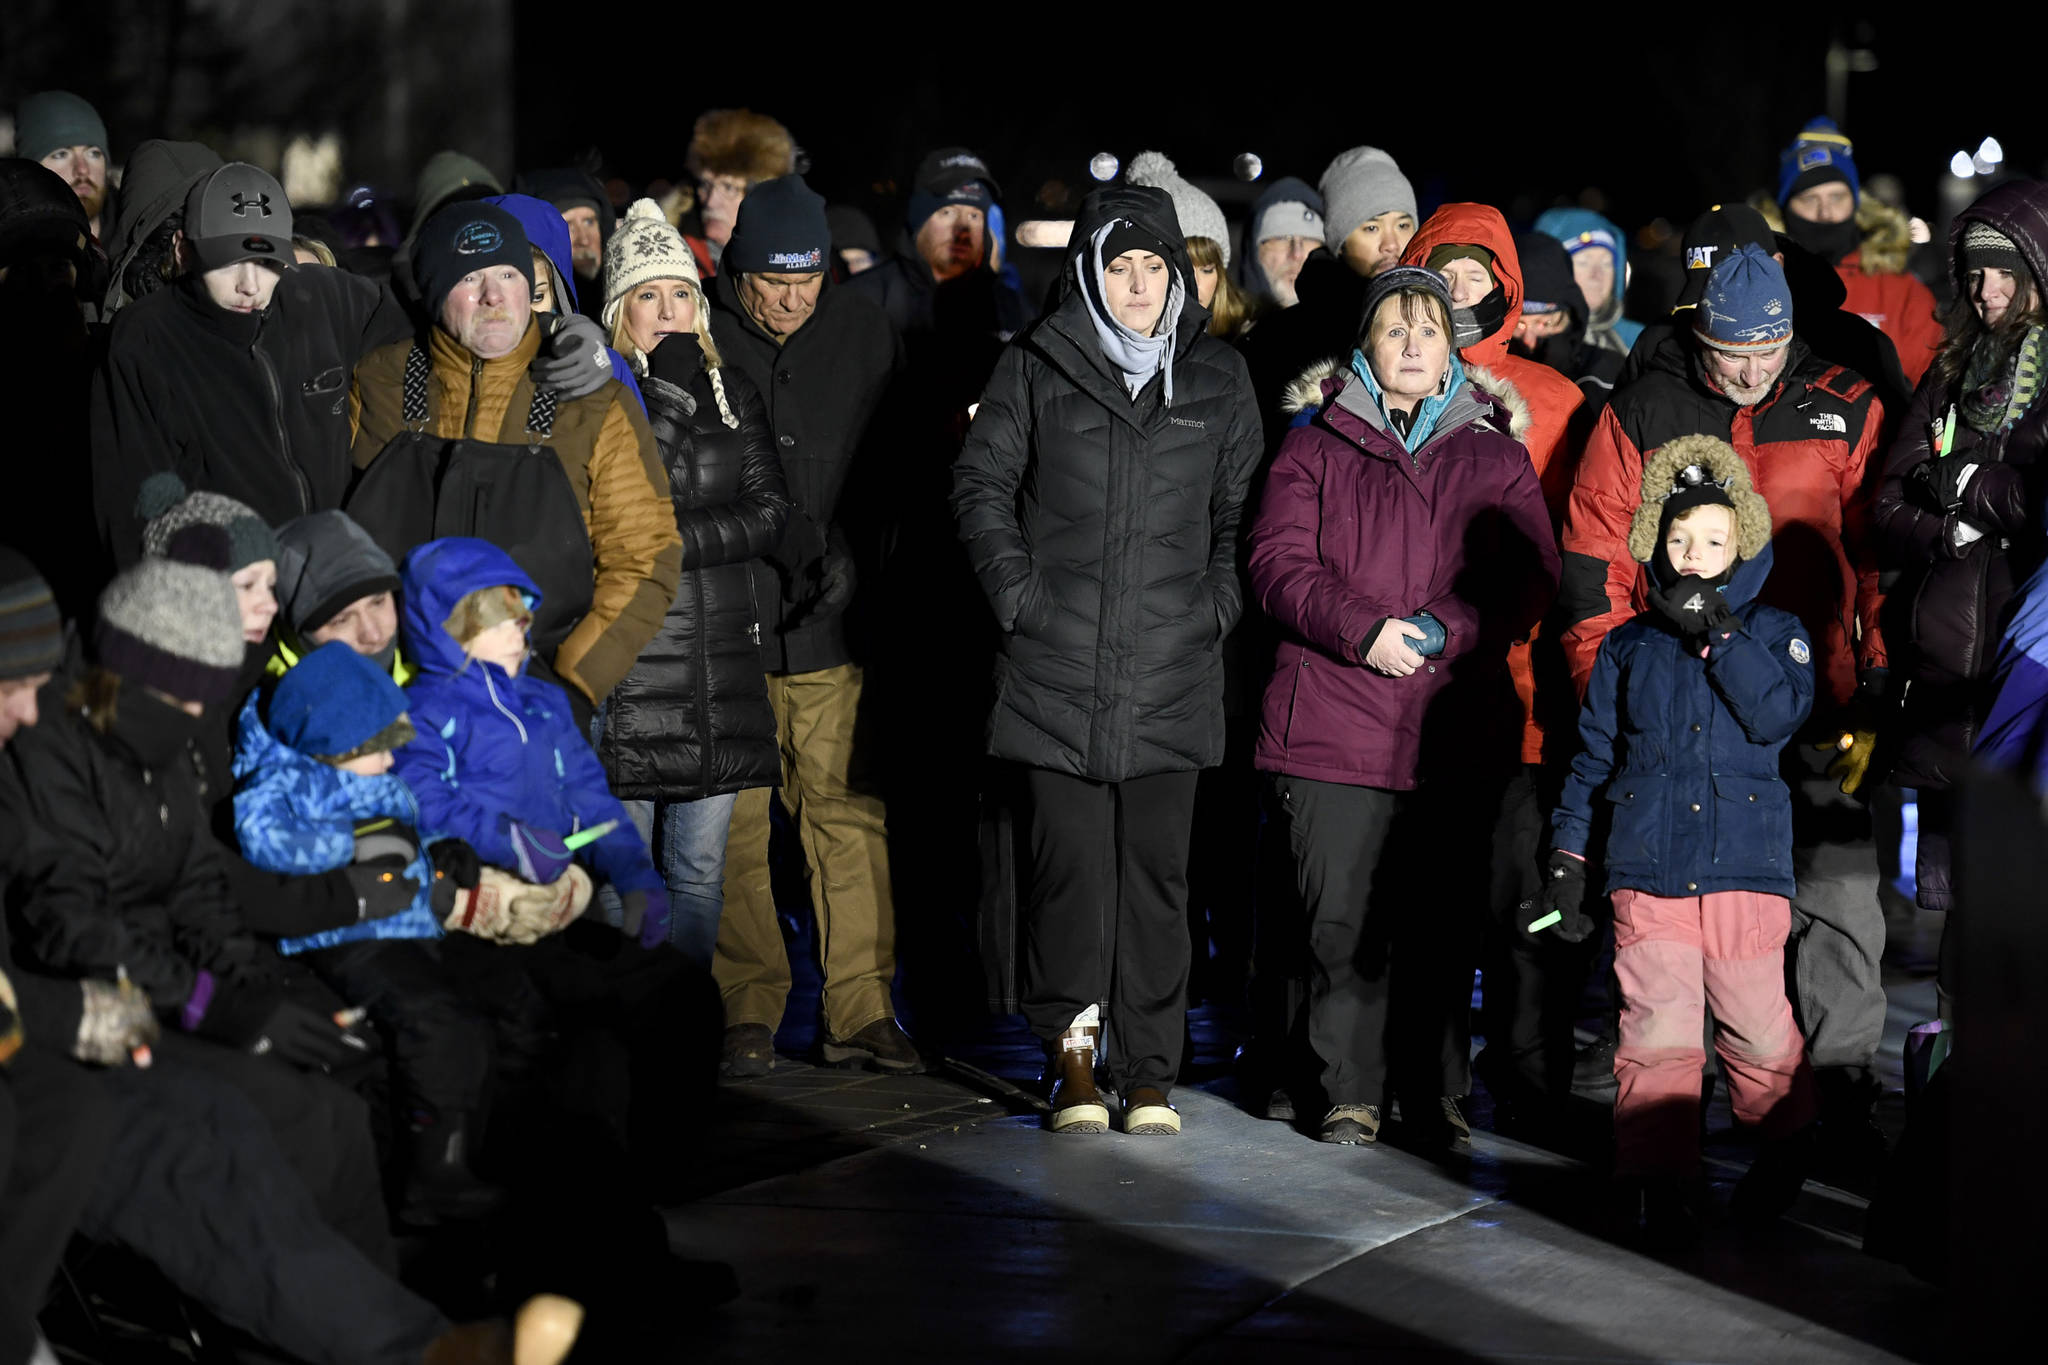 Hundreds of Juneau residents turnout Friday, Feb. 1, 2019, in 8-degree weather for a candlelight vigil at Mayor Bill Overstreet Park for the Guardian medical flight crew that went missing this week. (Michael Penn | Juneau Empire)